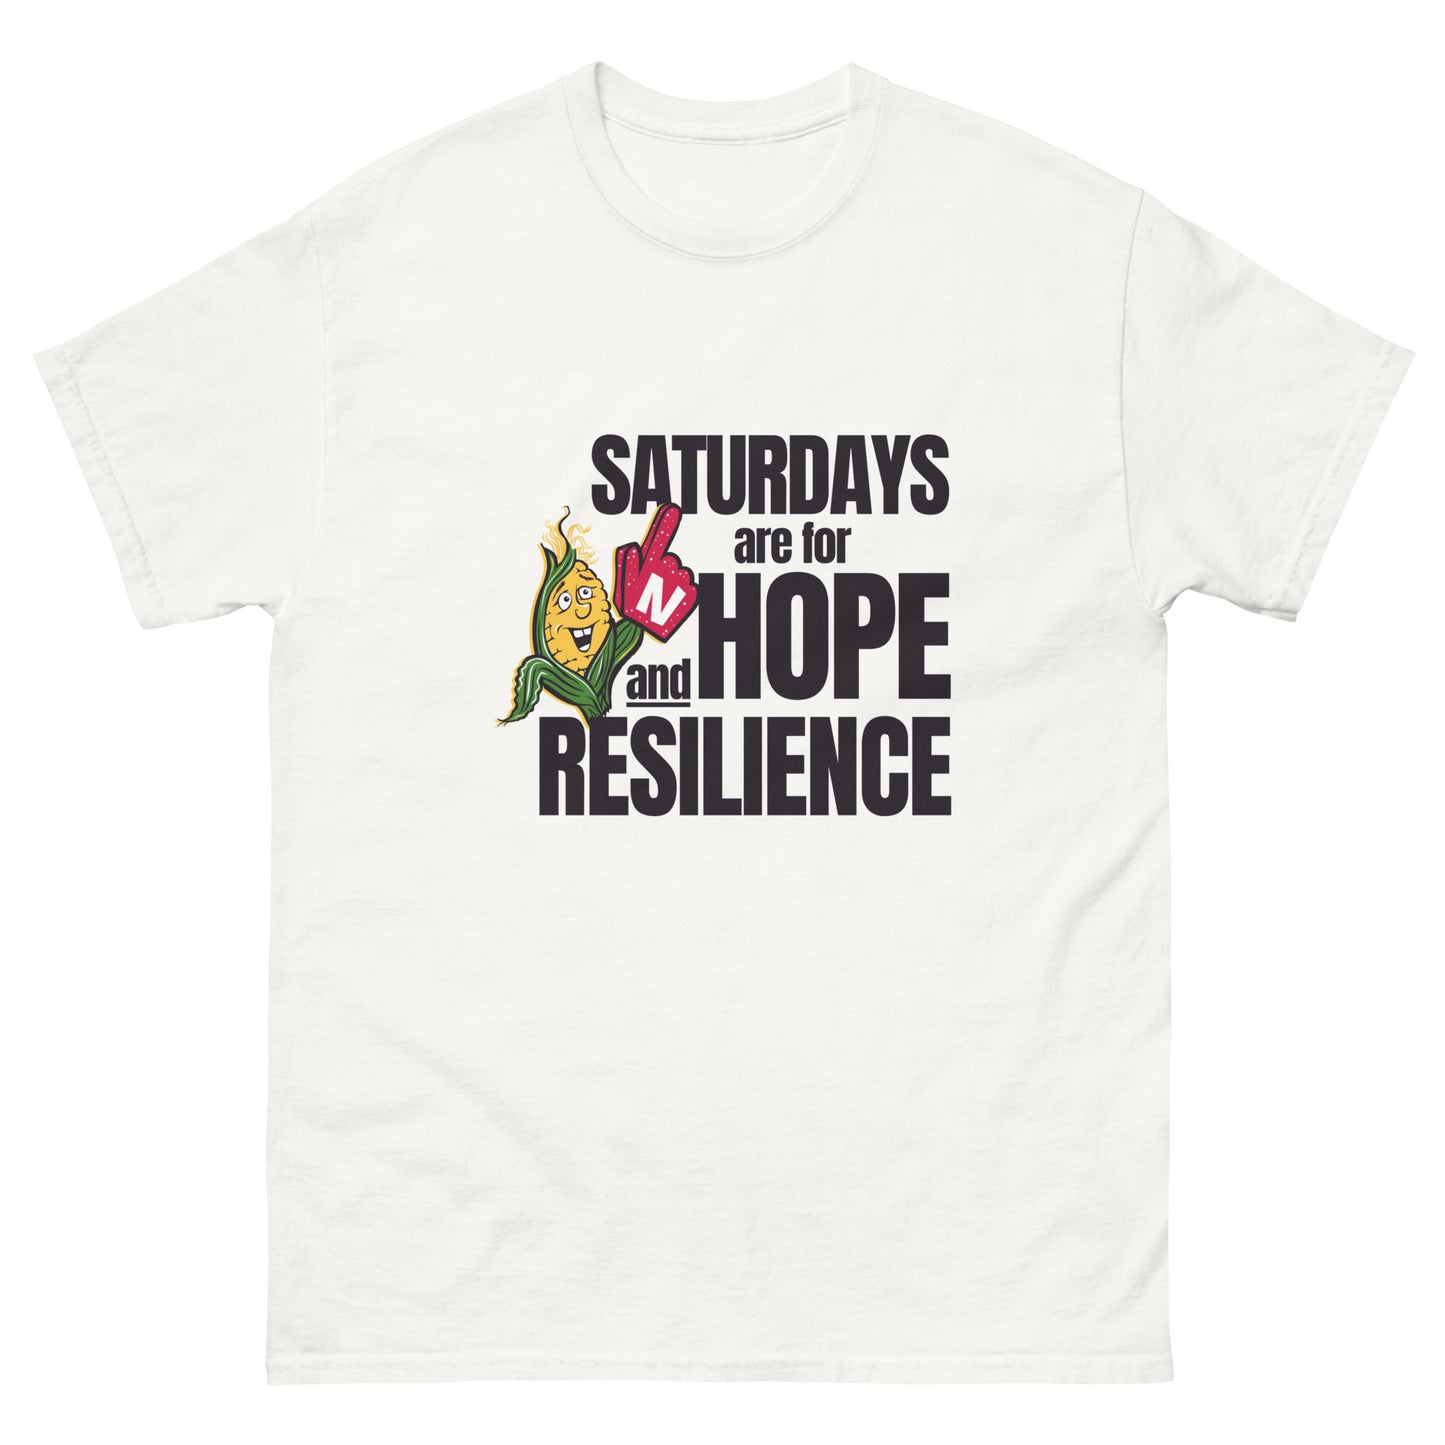 Hope And Resilience - Men's classic tee